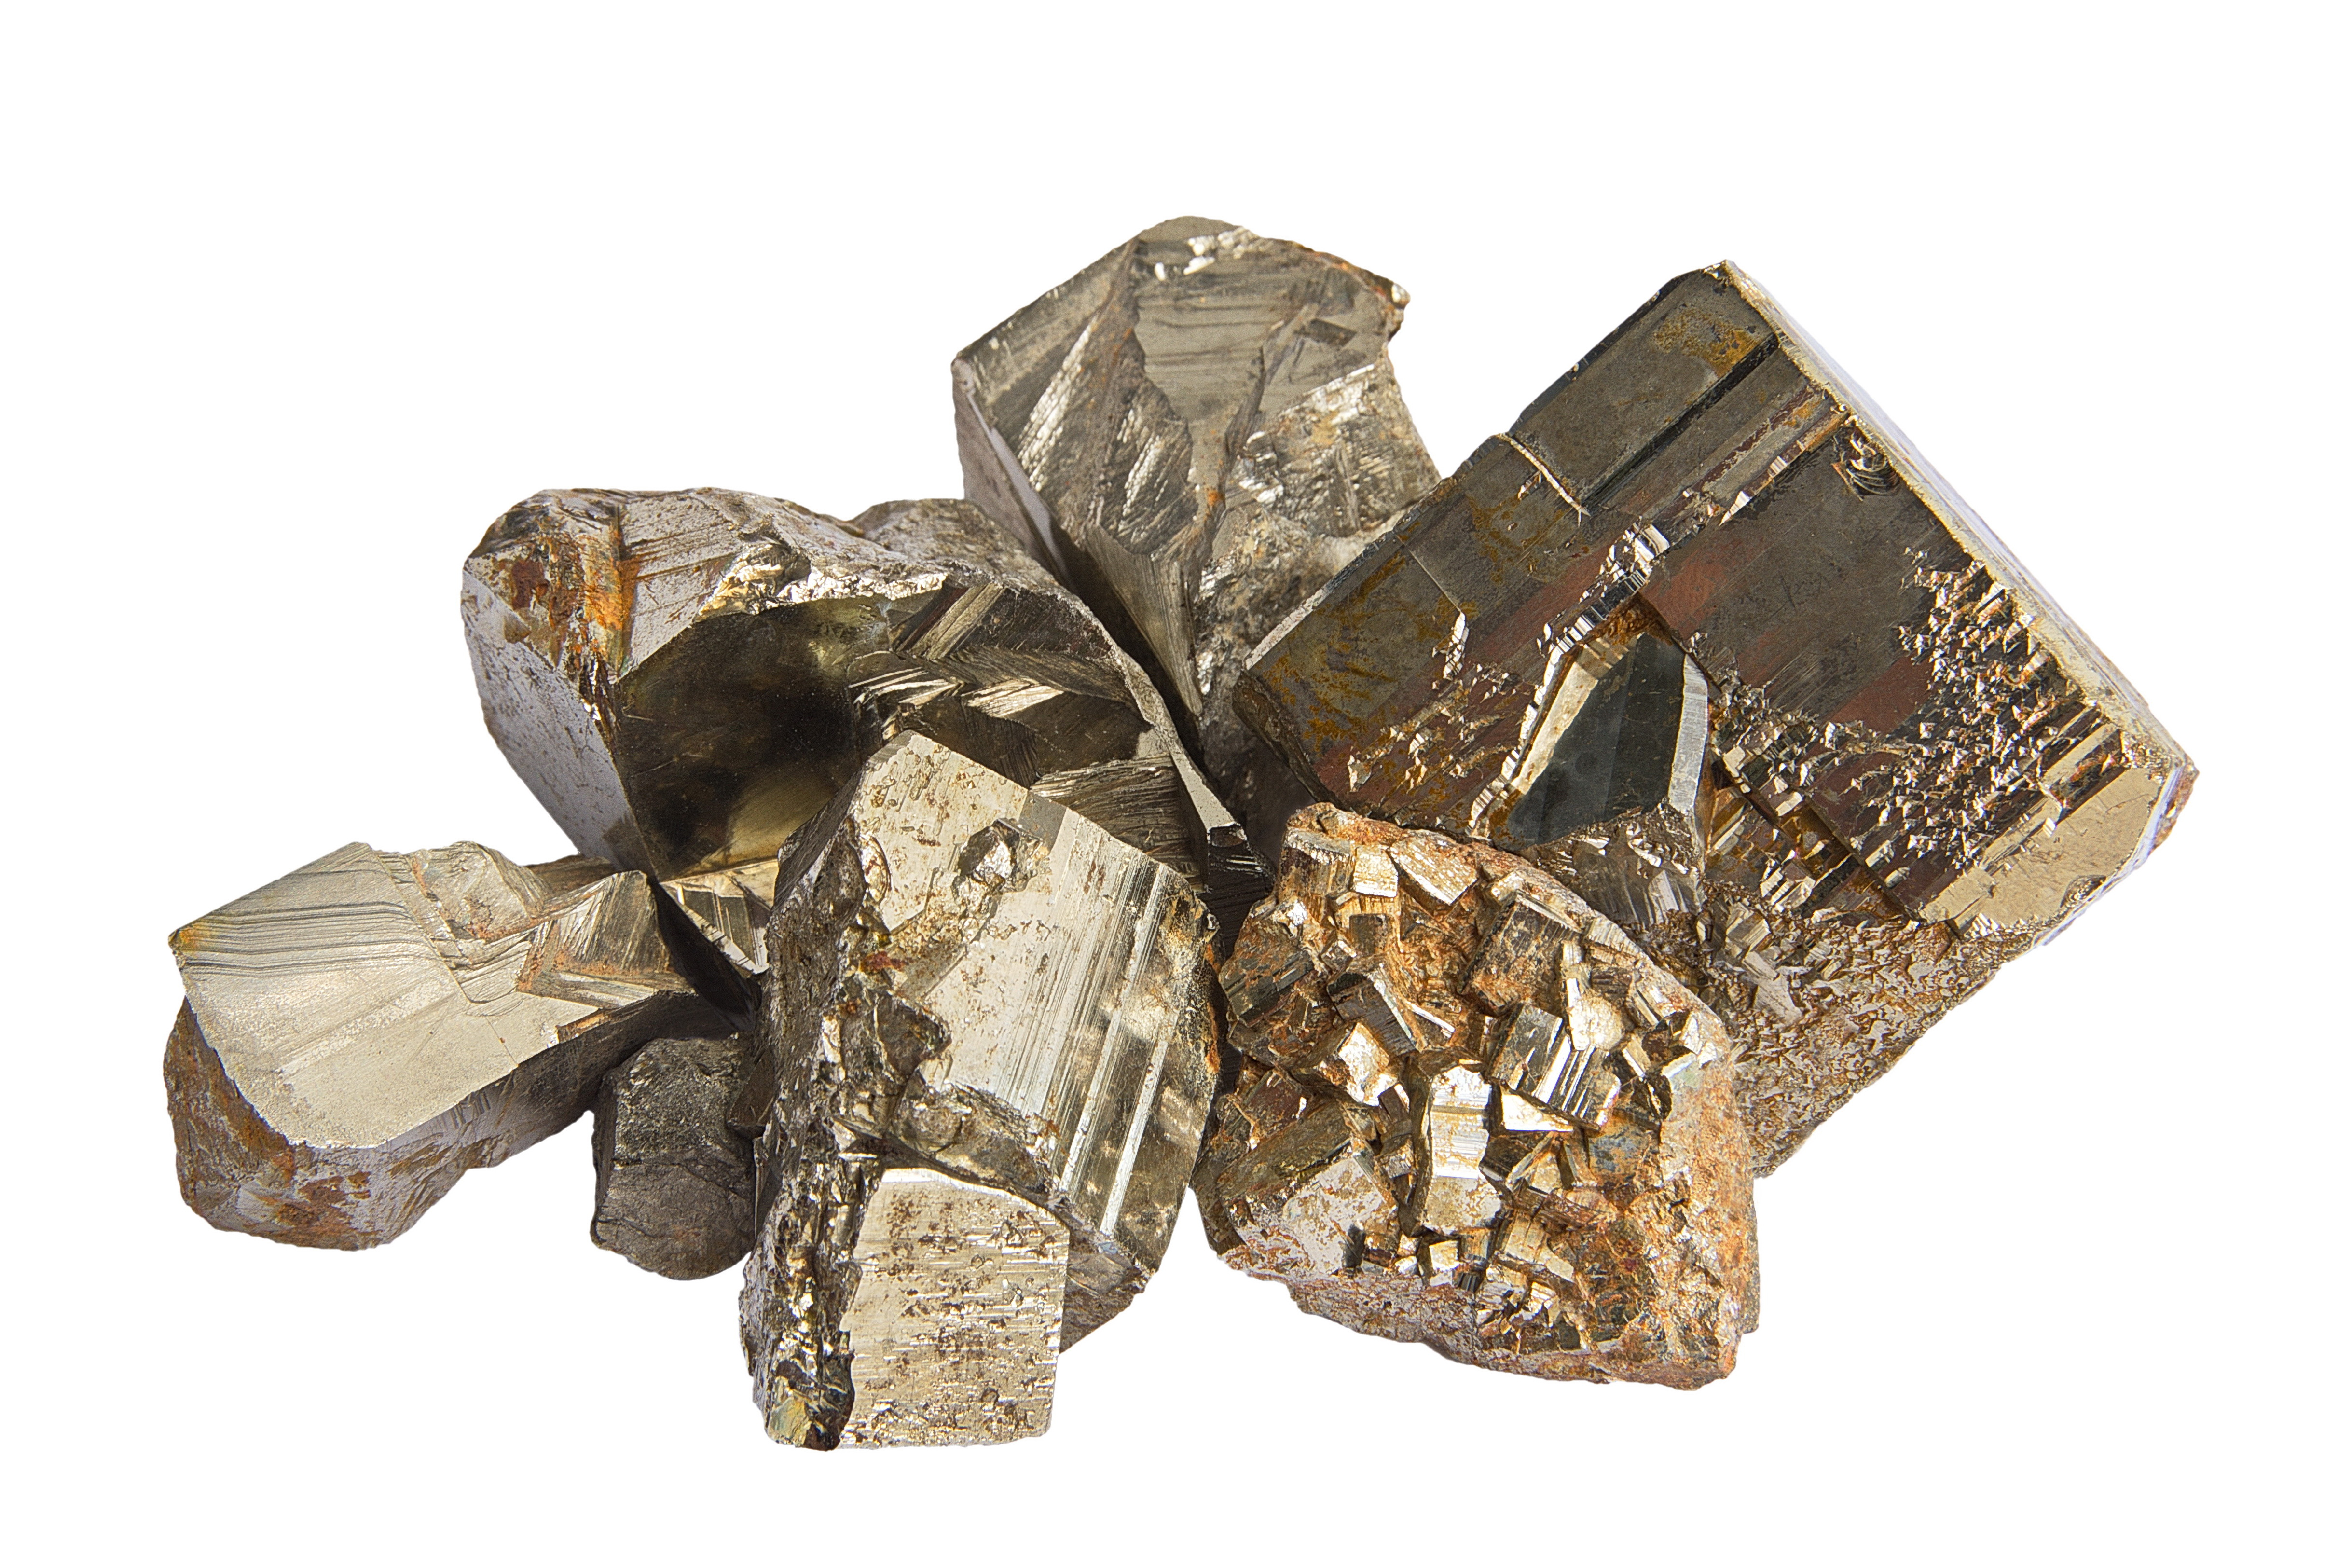 Multiple pieces of Pyrite on a white background